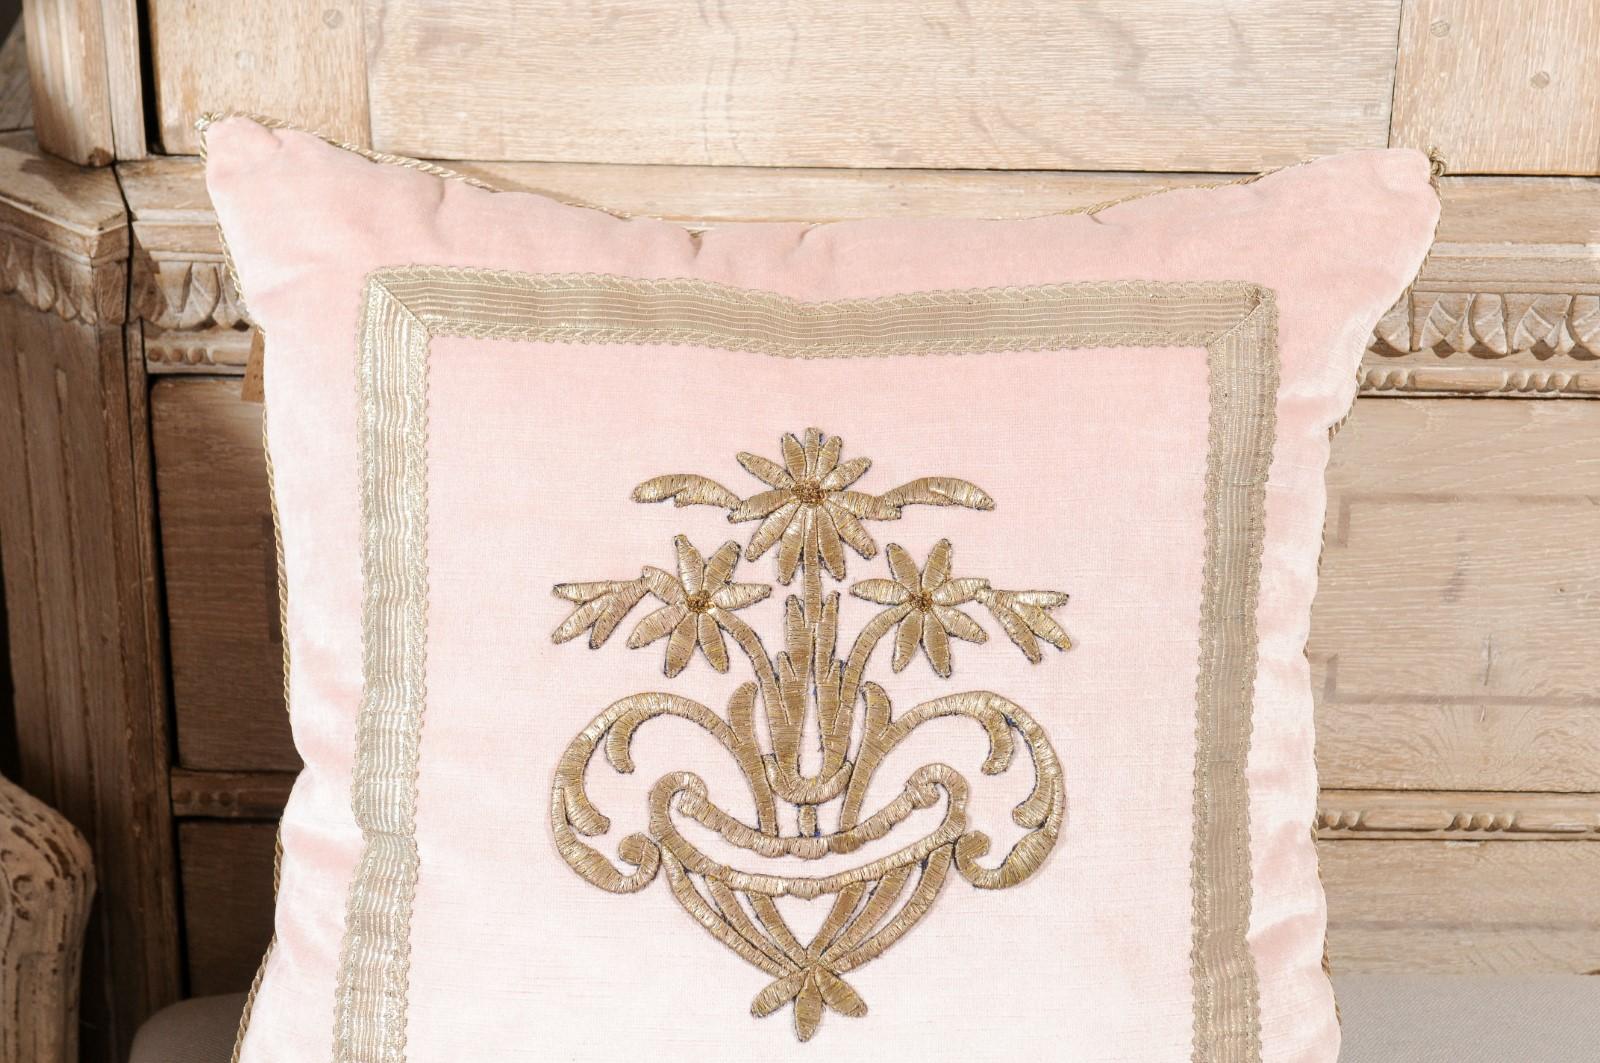 An antique Ottoman Empire silver metallic floral embroidery on brush pink velvet made into a throw pillow. We currently have two pillows available, priced and sold individually. Made of an exquisite antique Ottoman Empire silver metallic embroidery